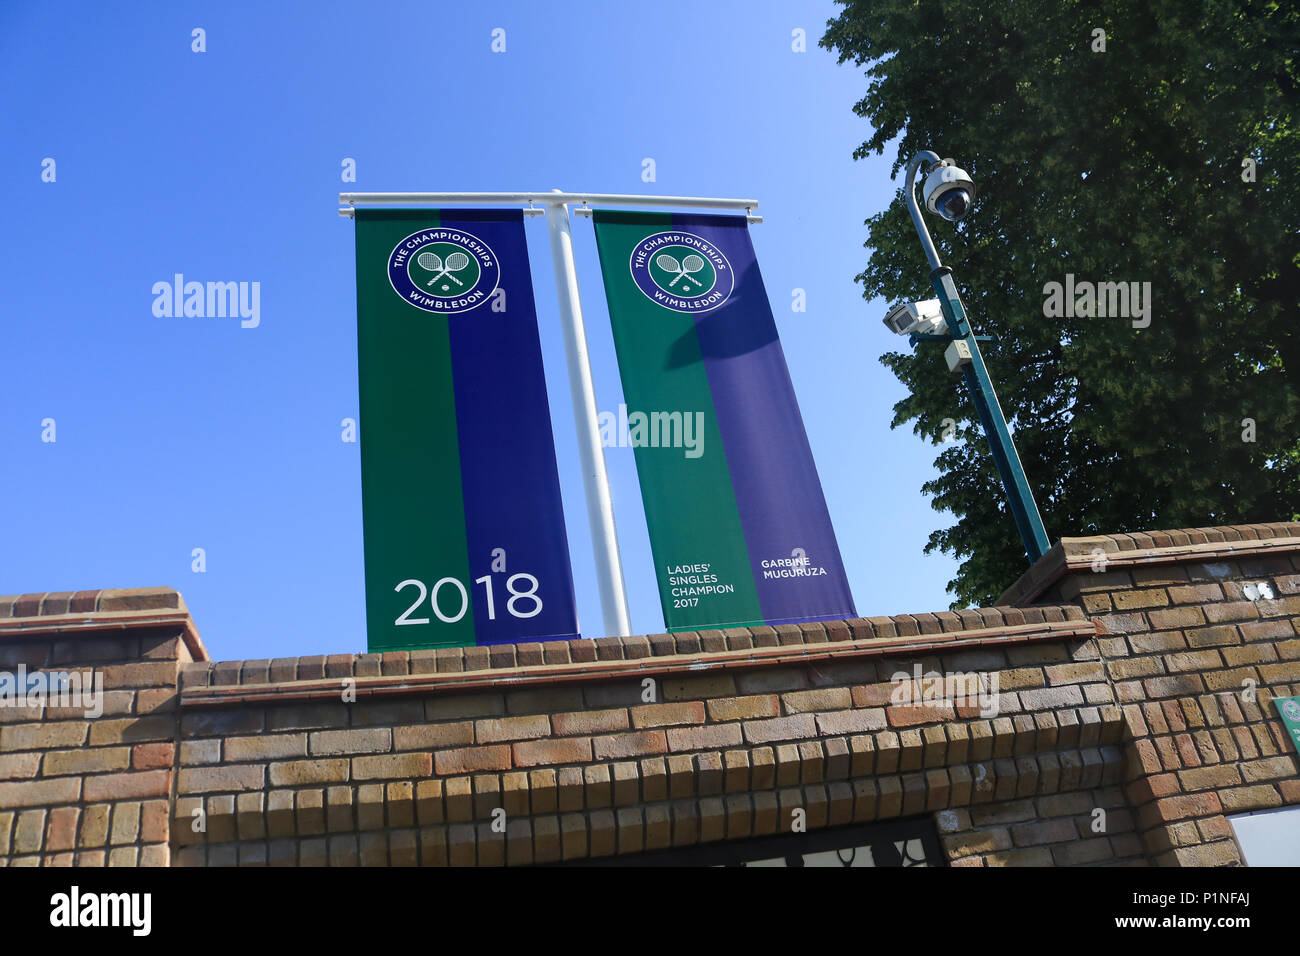 London UK. 13th June 2018.  Roll of Honour Banners  showing the 2017 Wimbledon Men's and Ladies Singles champions Roger Federer and Garbine Muguruza are displayed at the gates of the AELTC in Wimbledon with 3 weeks left until the start of the 2018 Tennis Championships Credit: amer ghazzal/Alamy Live News Stock Photo